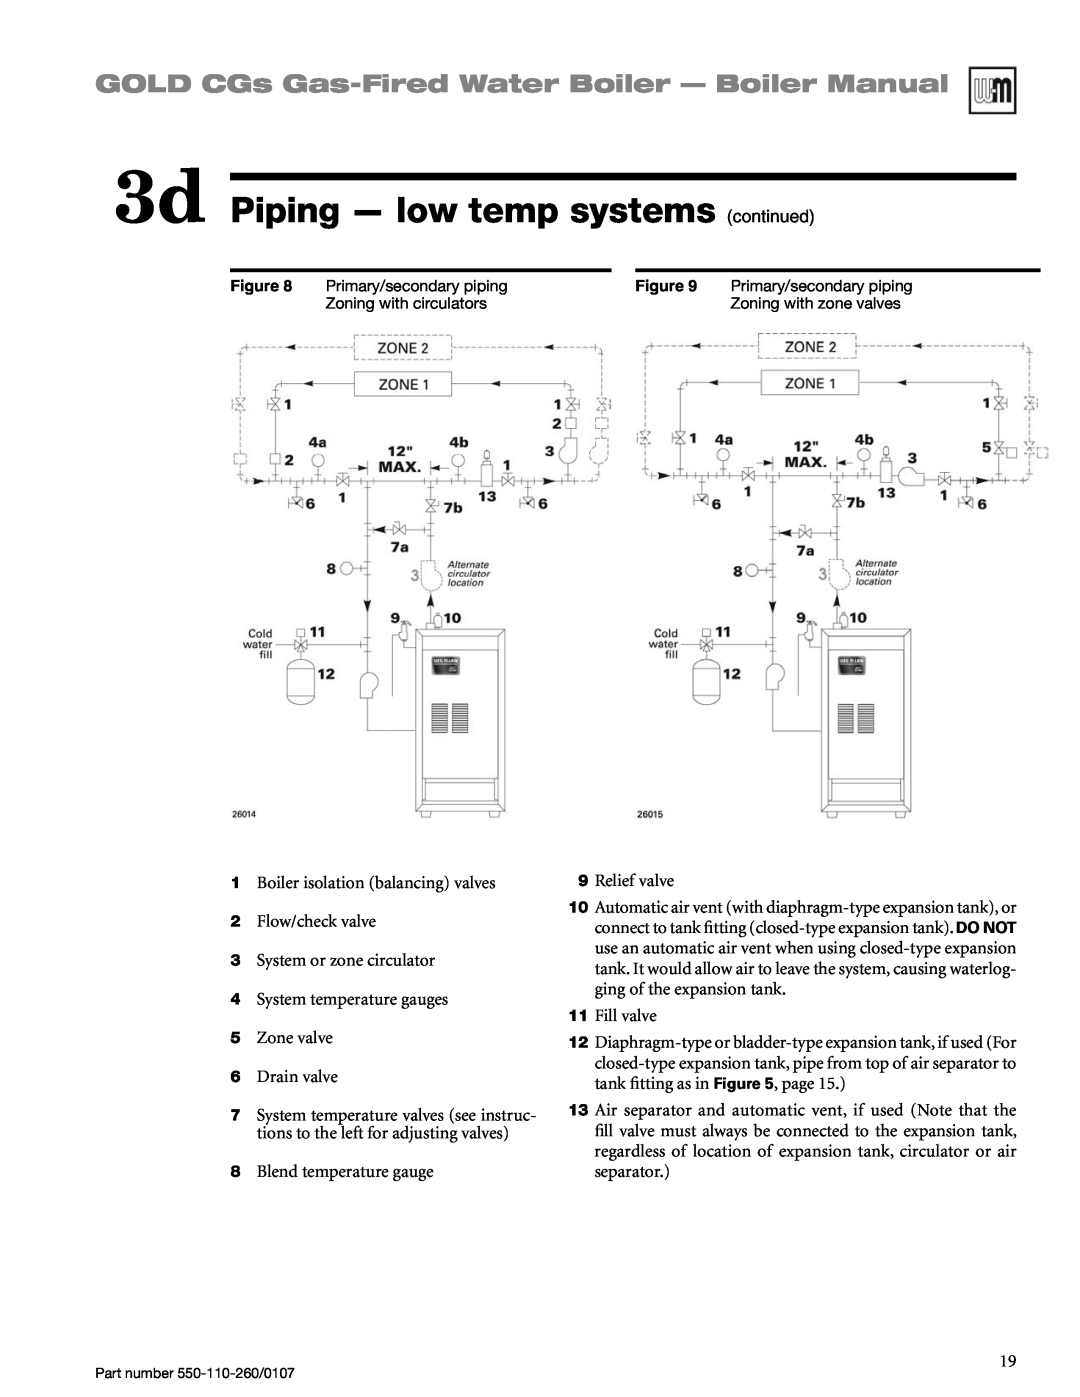 Weil-McLain 550-110-260/0107 manual 3d Piping — low temp systems continued, GOLD CGs Gas-FiredWater Boiler — Boiler Manual 